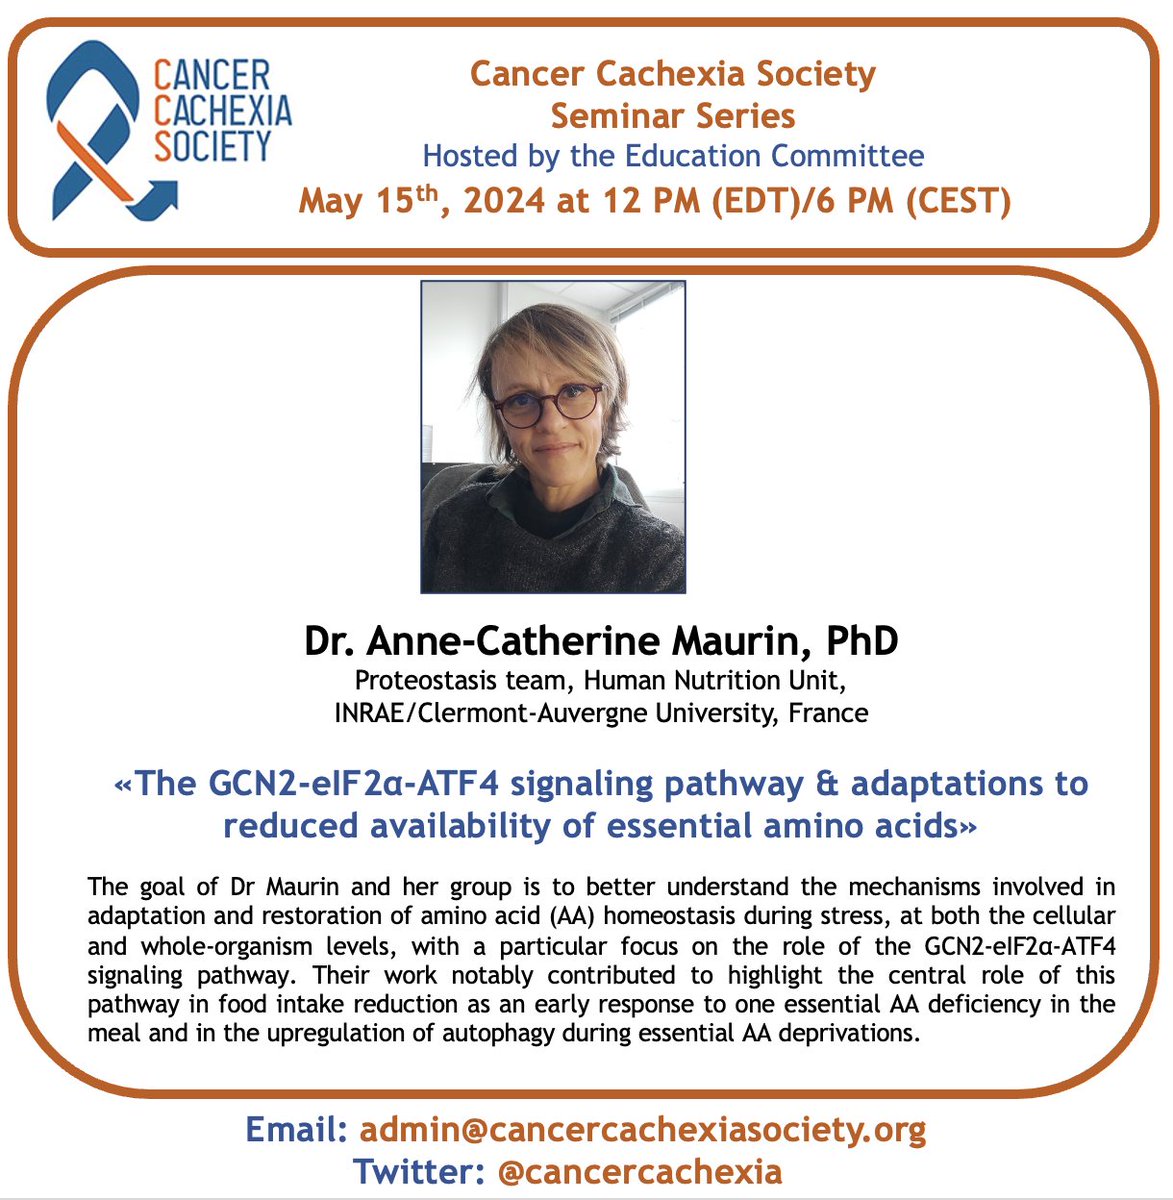 The Education Committee of the @CancerCachexia Society invites you to our seminar on May 15 at 12:00 pm EDT with Dr. Anne-Catherine Maurin, PhD, INRAE/Clermont-Auvergne University, France. Seminars are open to everyone, please share! See cancercachexiasociety.org to register.